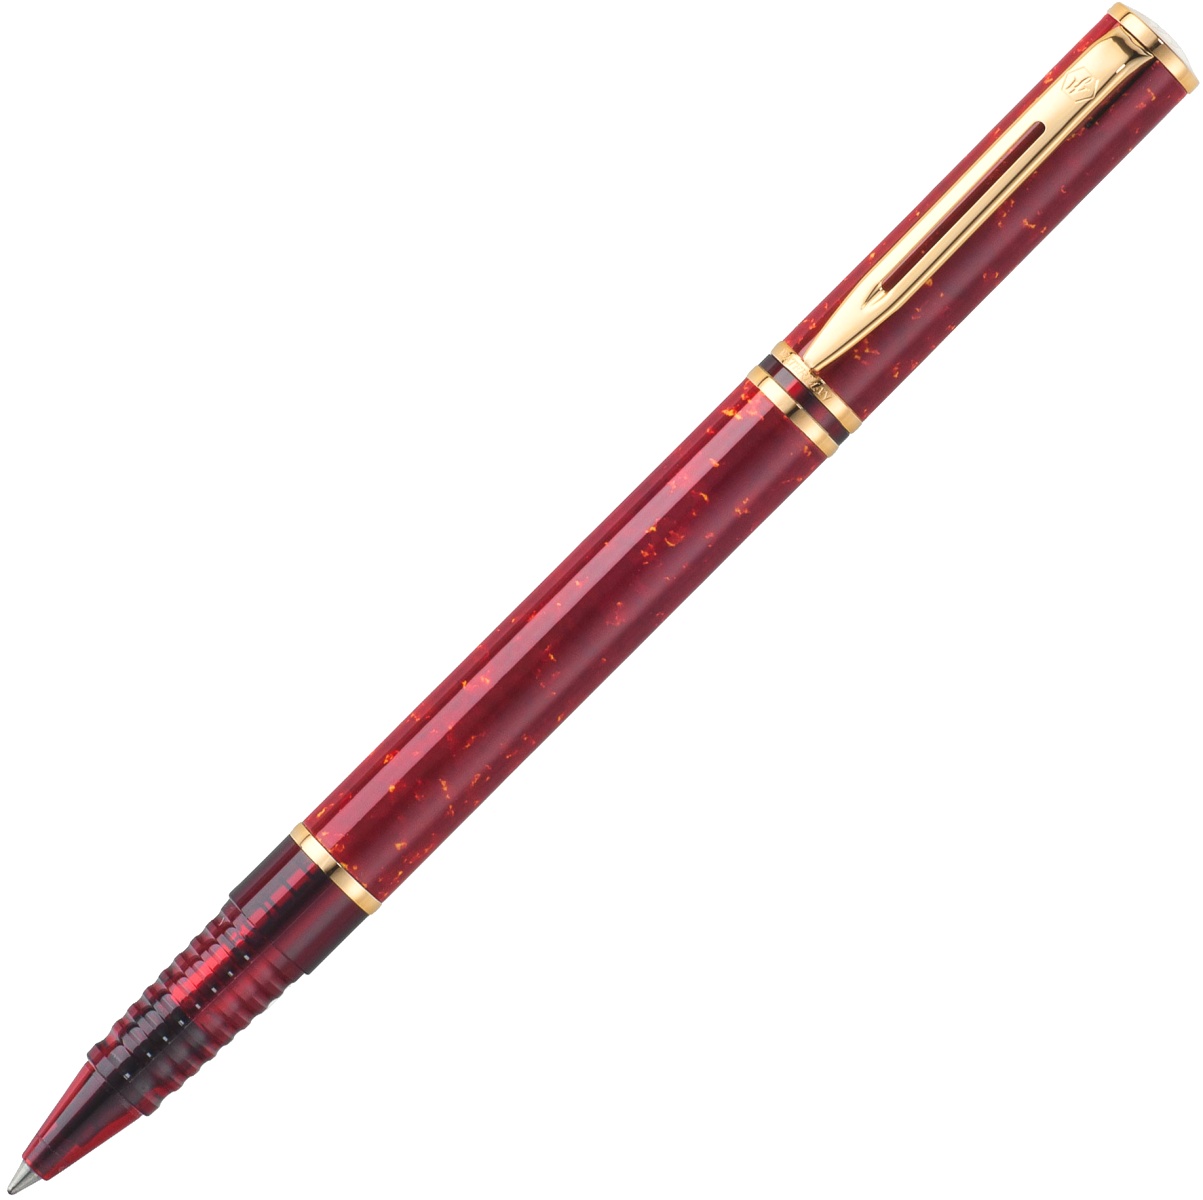  Ручка-роллер Waterman Laureat, Lacquer Red Safran GT